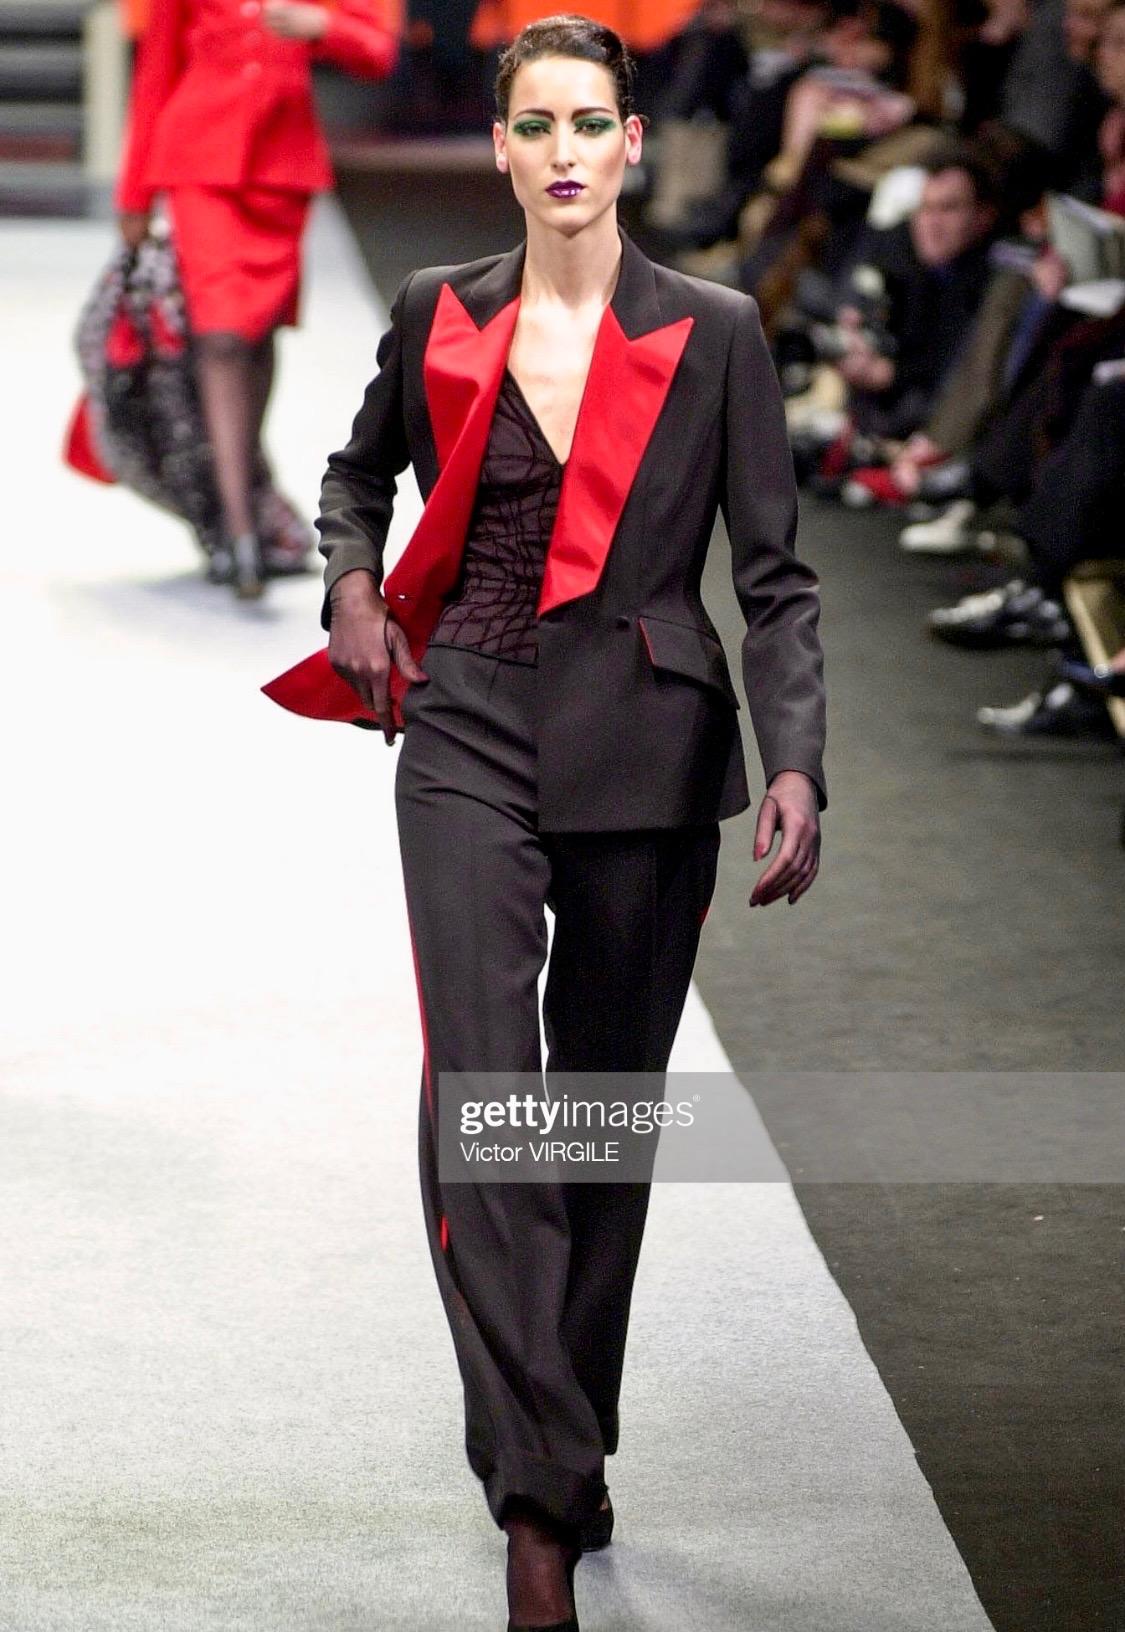 TheRealList presents: a Thierry Mugler pantsuit with red silk satin details, from Manfried Thierry Mugler's final collection before his retirement, the Fall/Winter 2001 